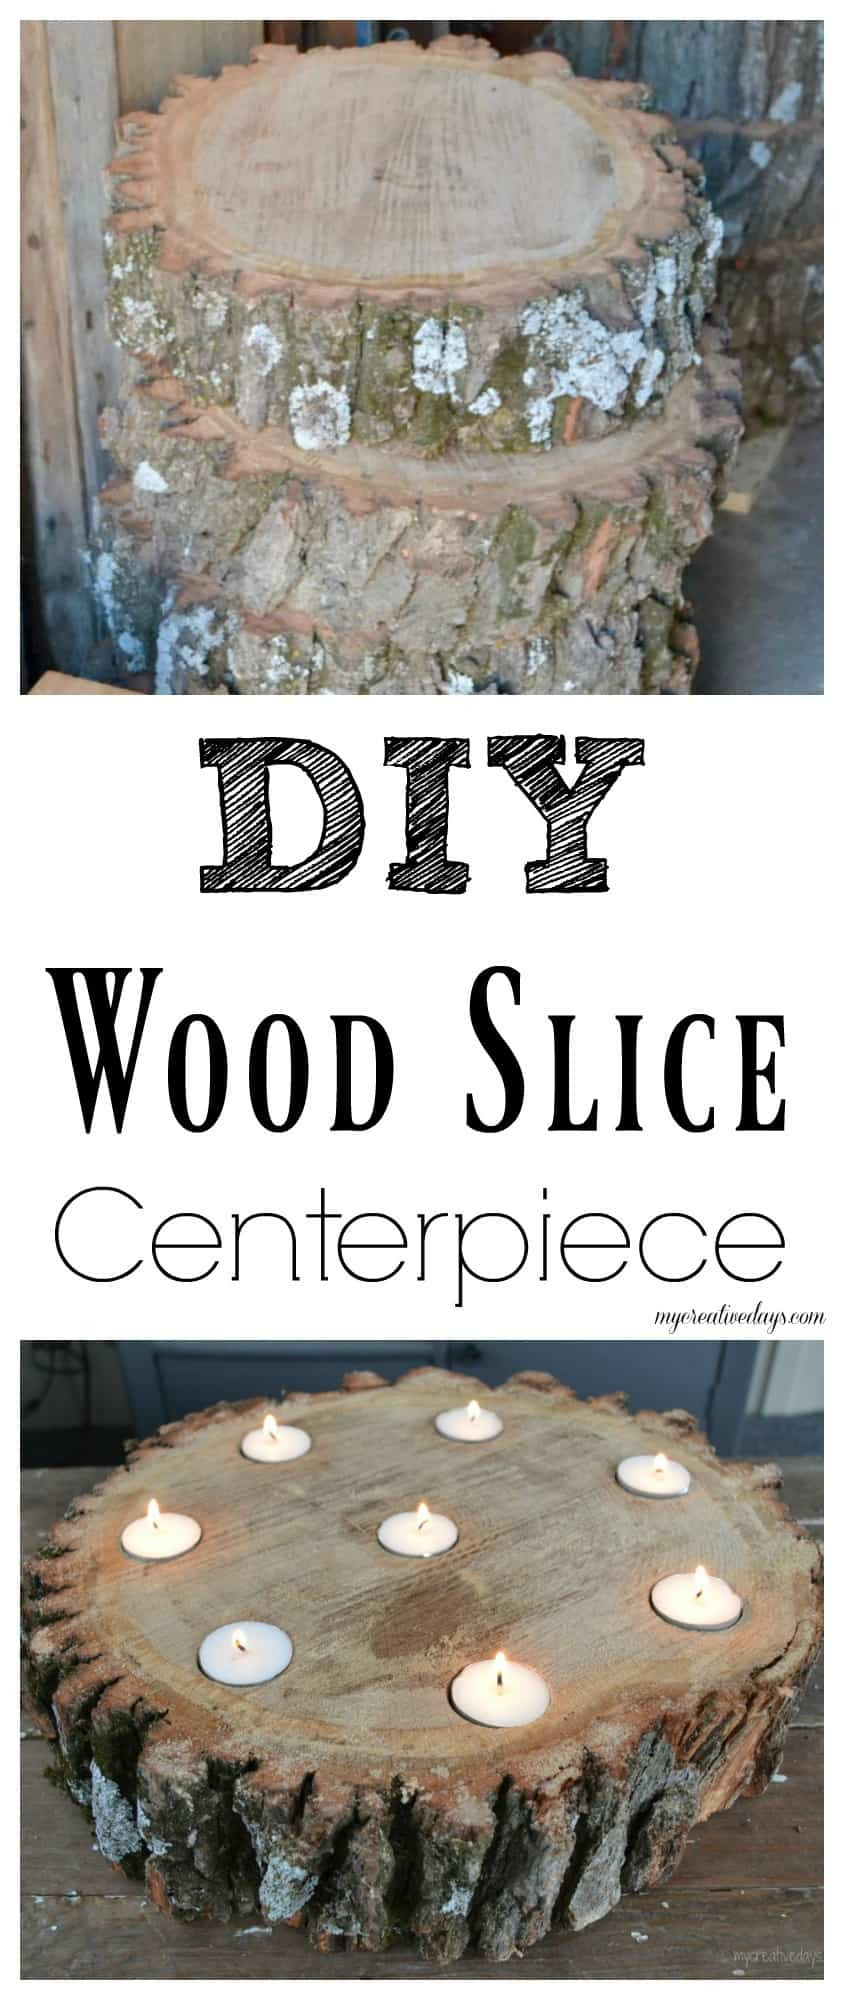 DIY Wood Slice Centerpiece
 DIY Wood Slice Centerpiece To Add Rustic Flair To Wherever